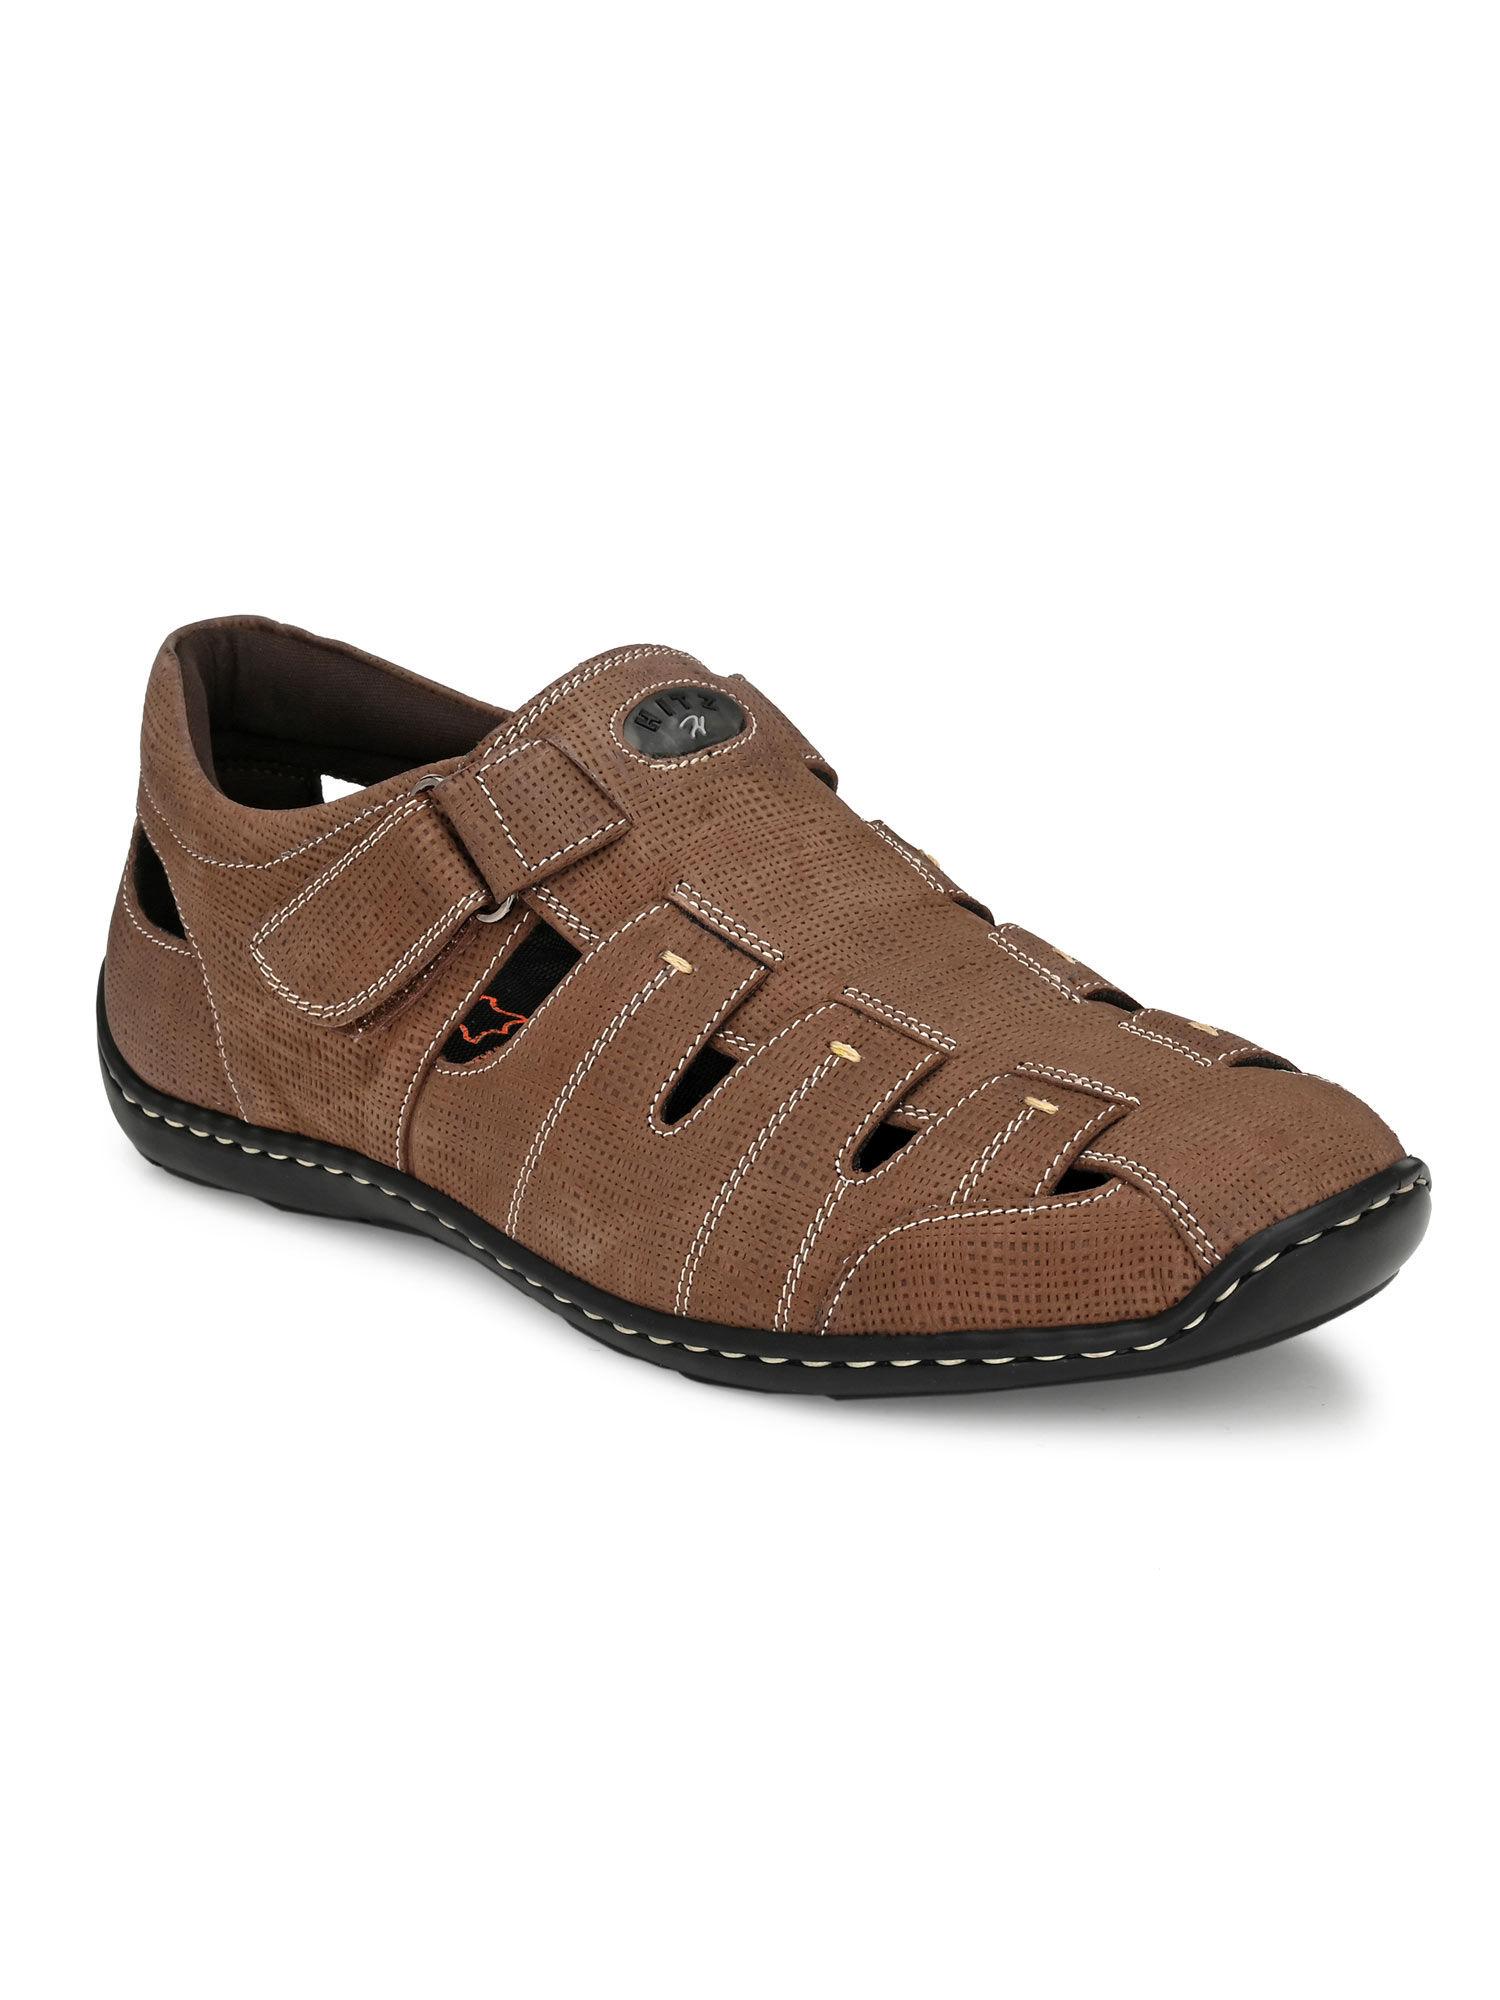 men's brown leather shoe-style sandals